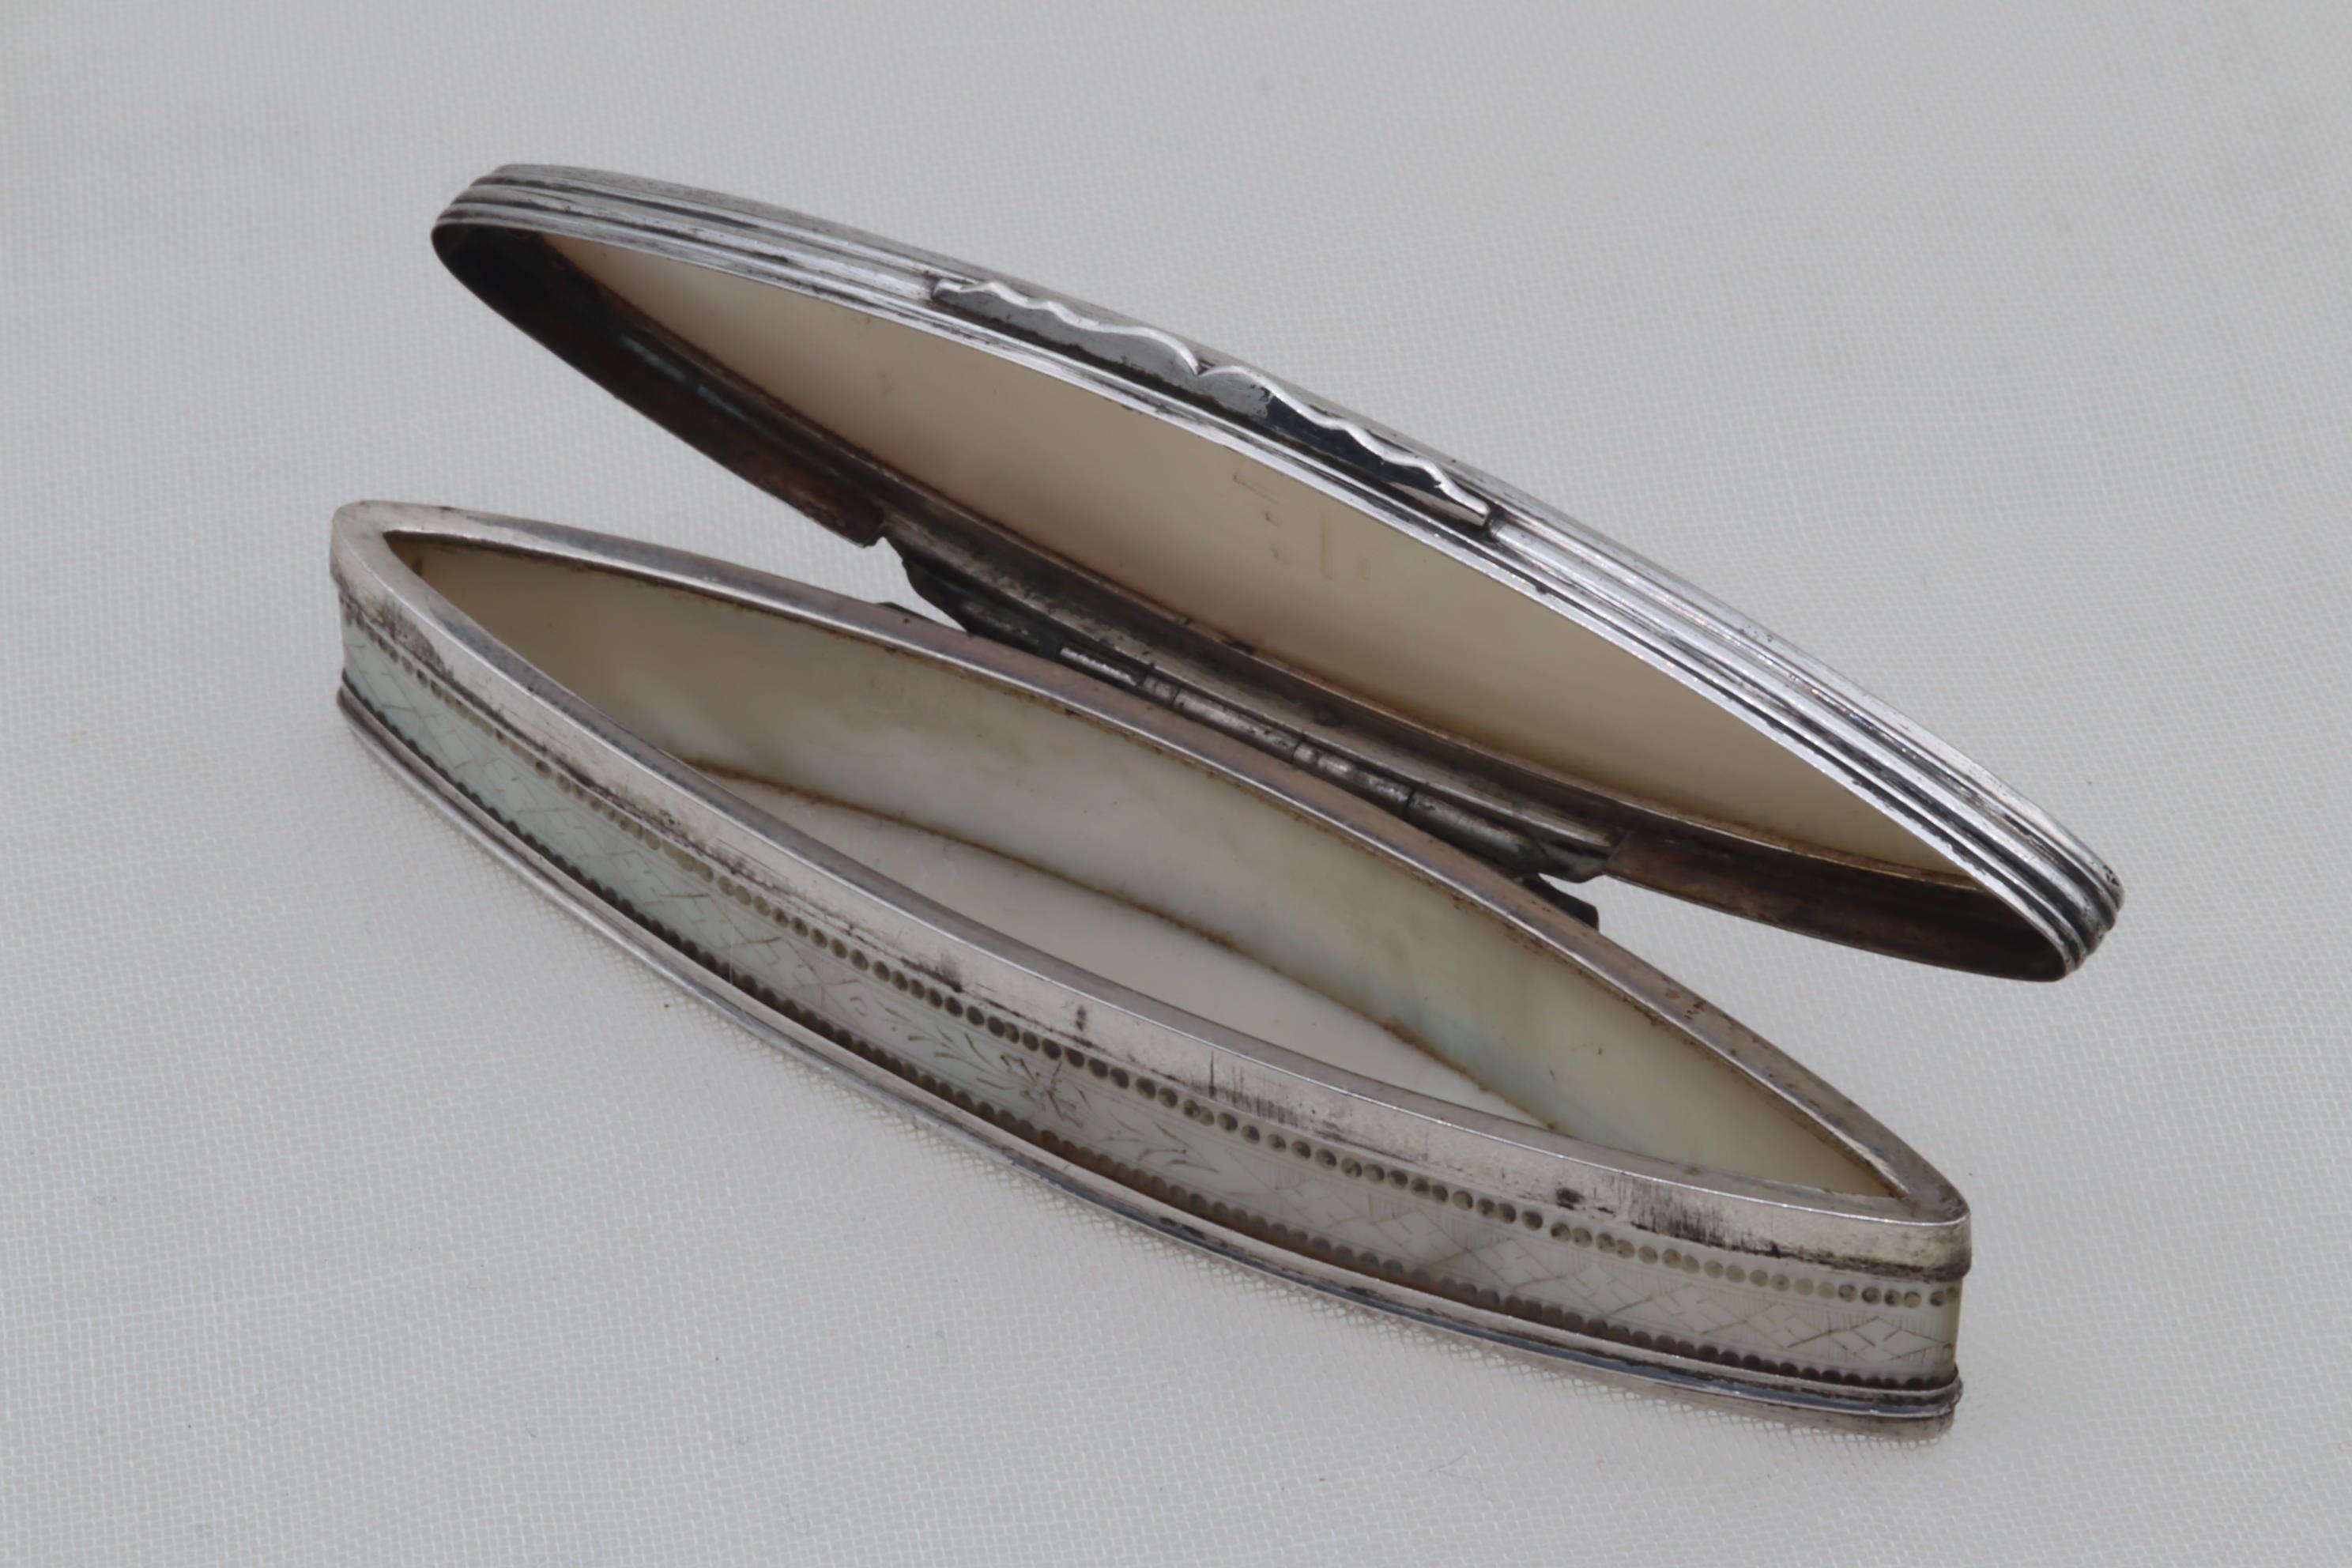 This lovely Georgian ladies toothpick case is an elongated oval in form known as a navette, and is made of a silver frame holding mother-of-pearl panels. The panels for the lid and the two sides are delicately engraved, with the top featuring a